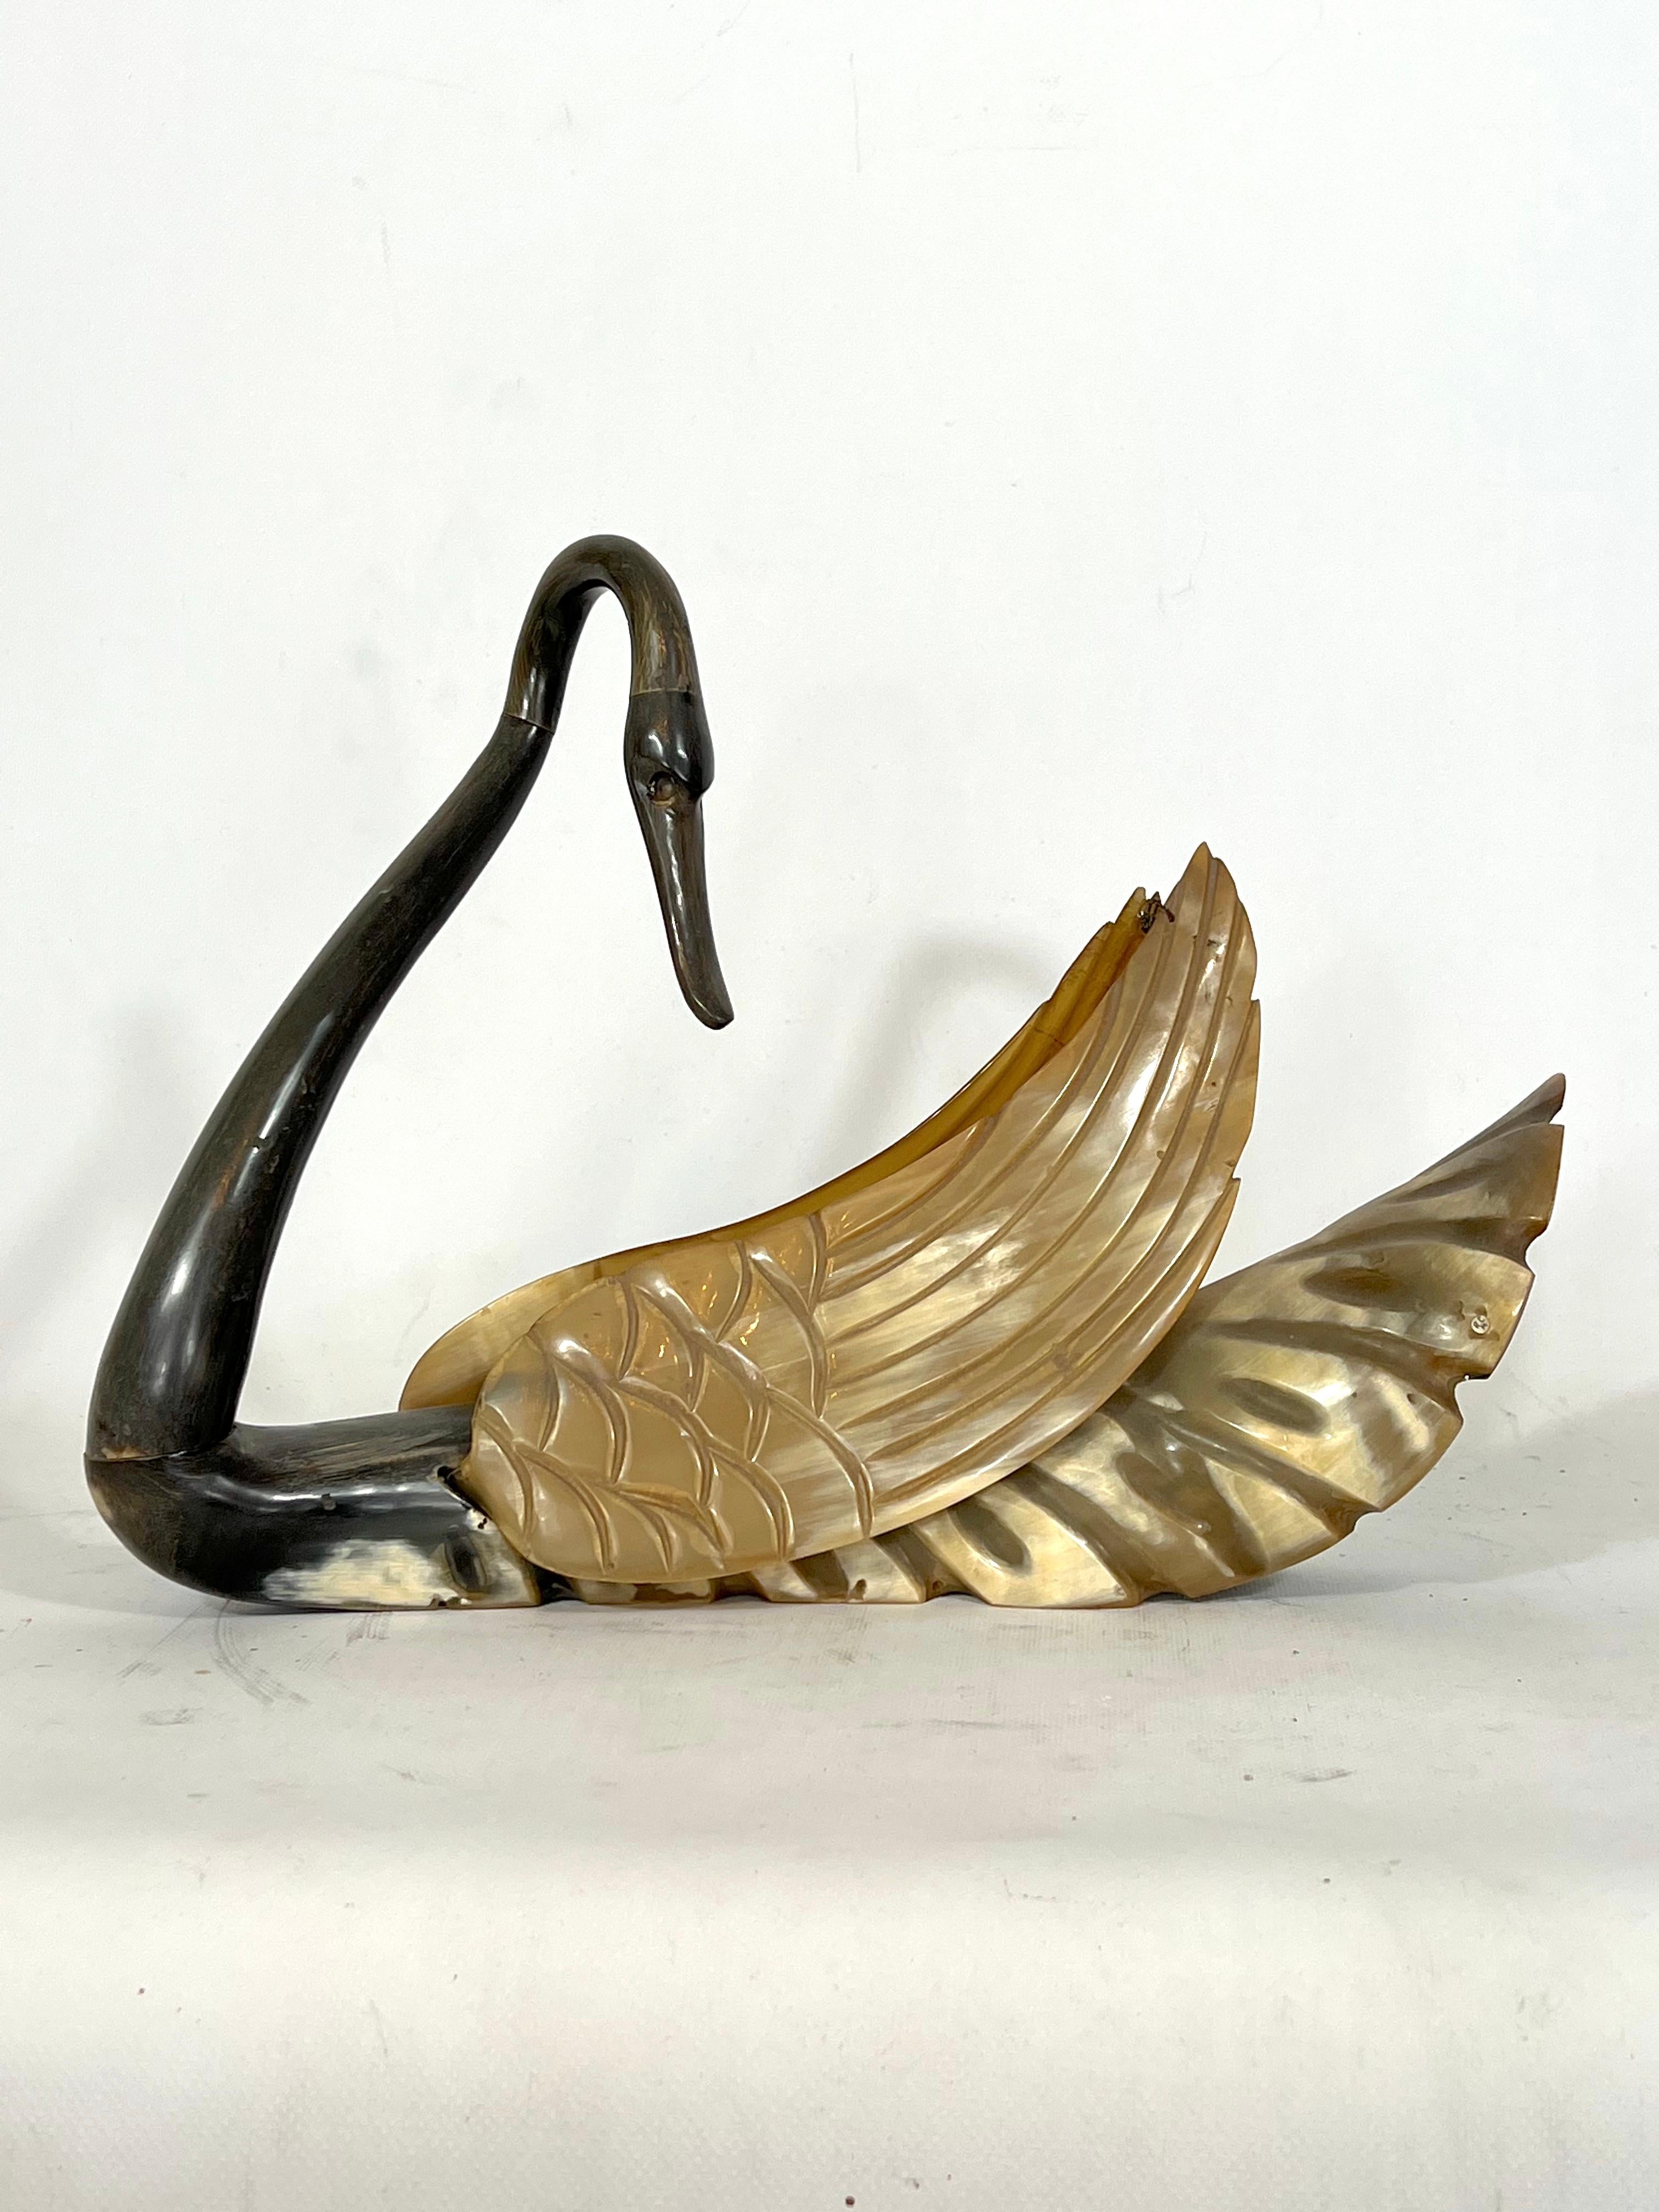 Excellent vintage condition with normal trace of age and use for this Art Nouveau swan sculpture made from horn.